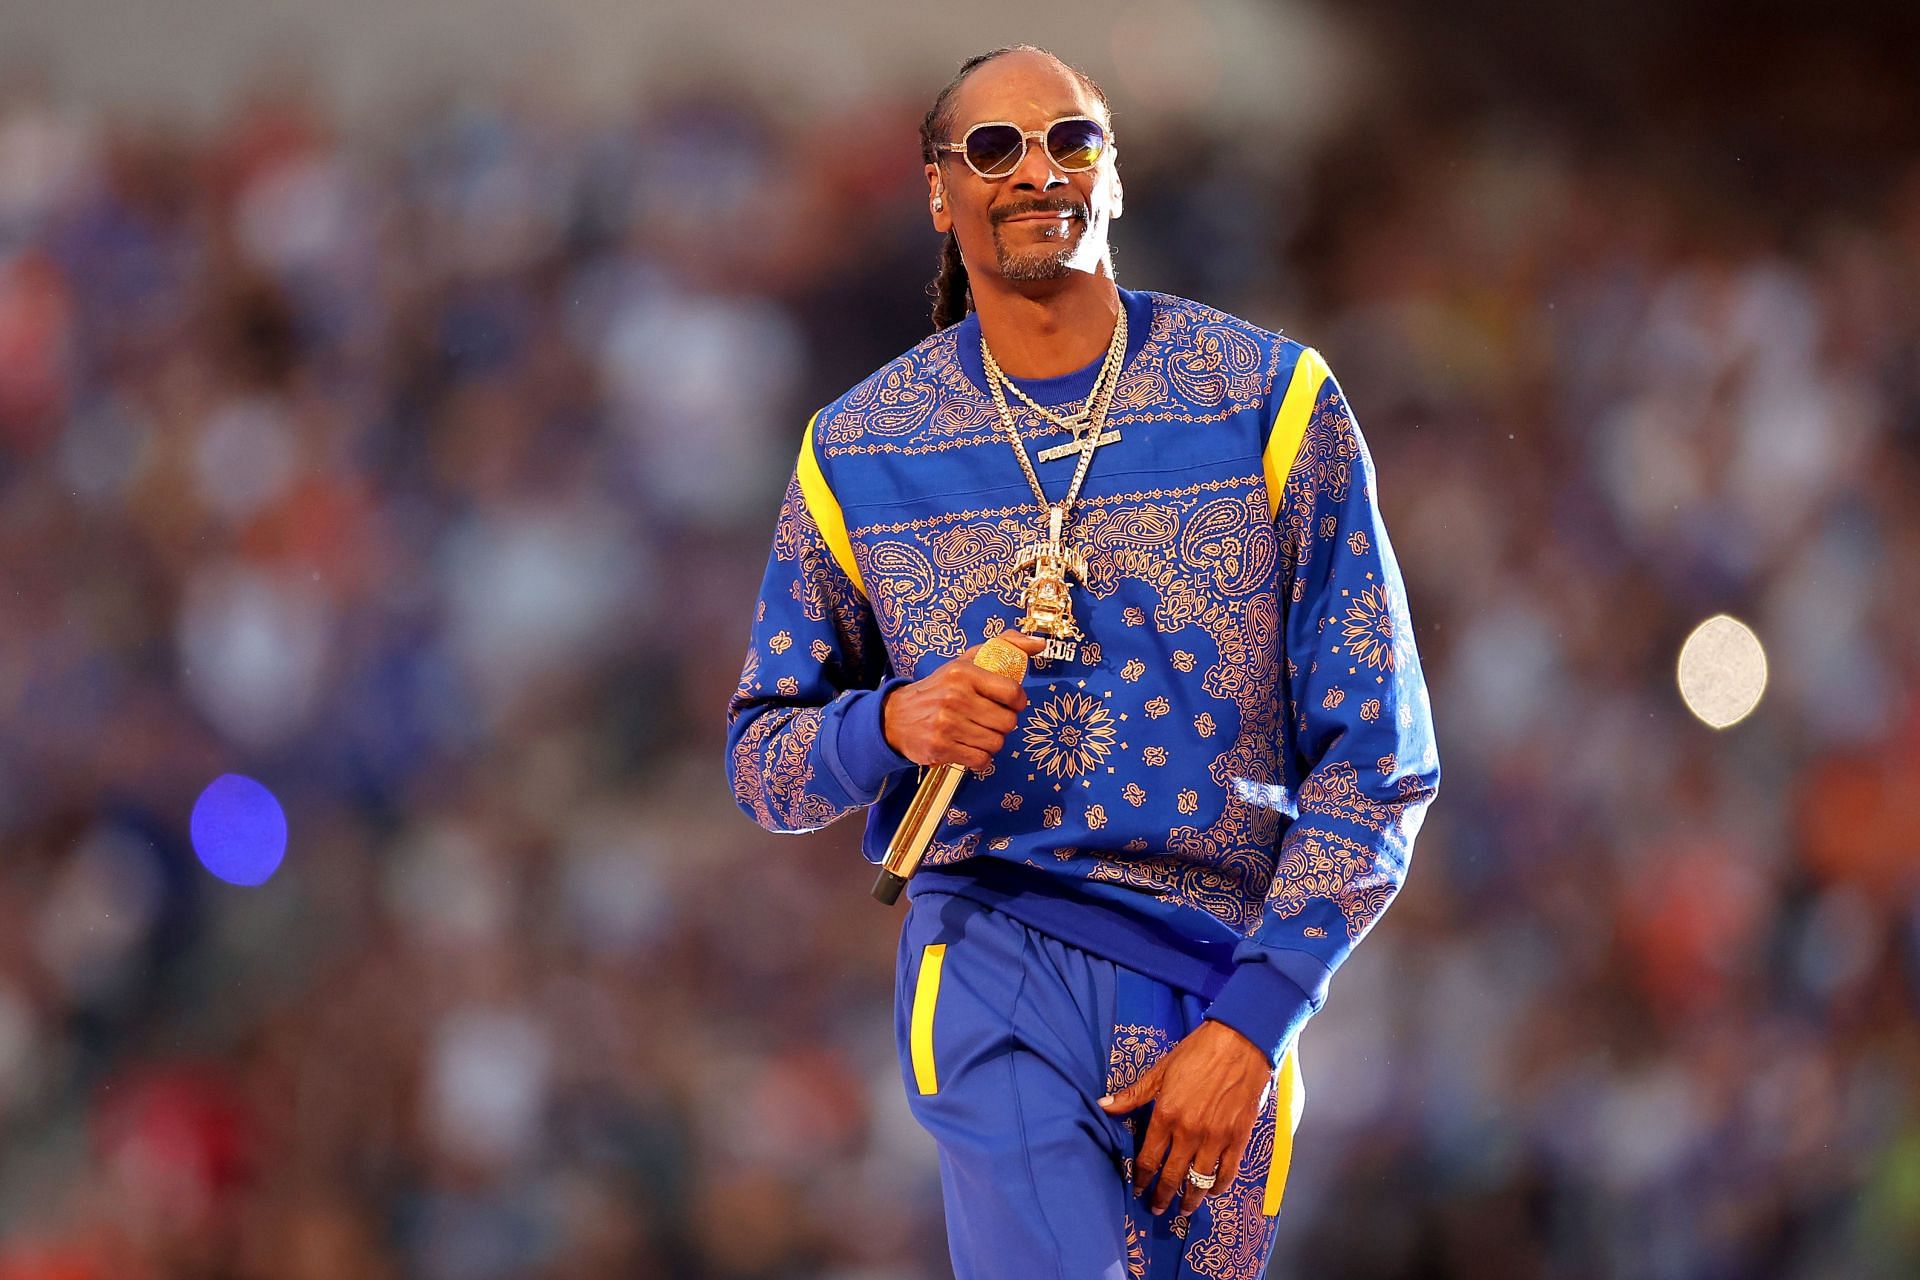 I knew we was going to sweep these motherf**kers”- Snoop Dogg revisits LA  Lakers' historic win over New Jersey Nets in the 2002 NBA Finals to  complete their 3-peat